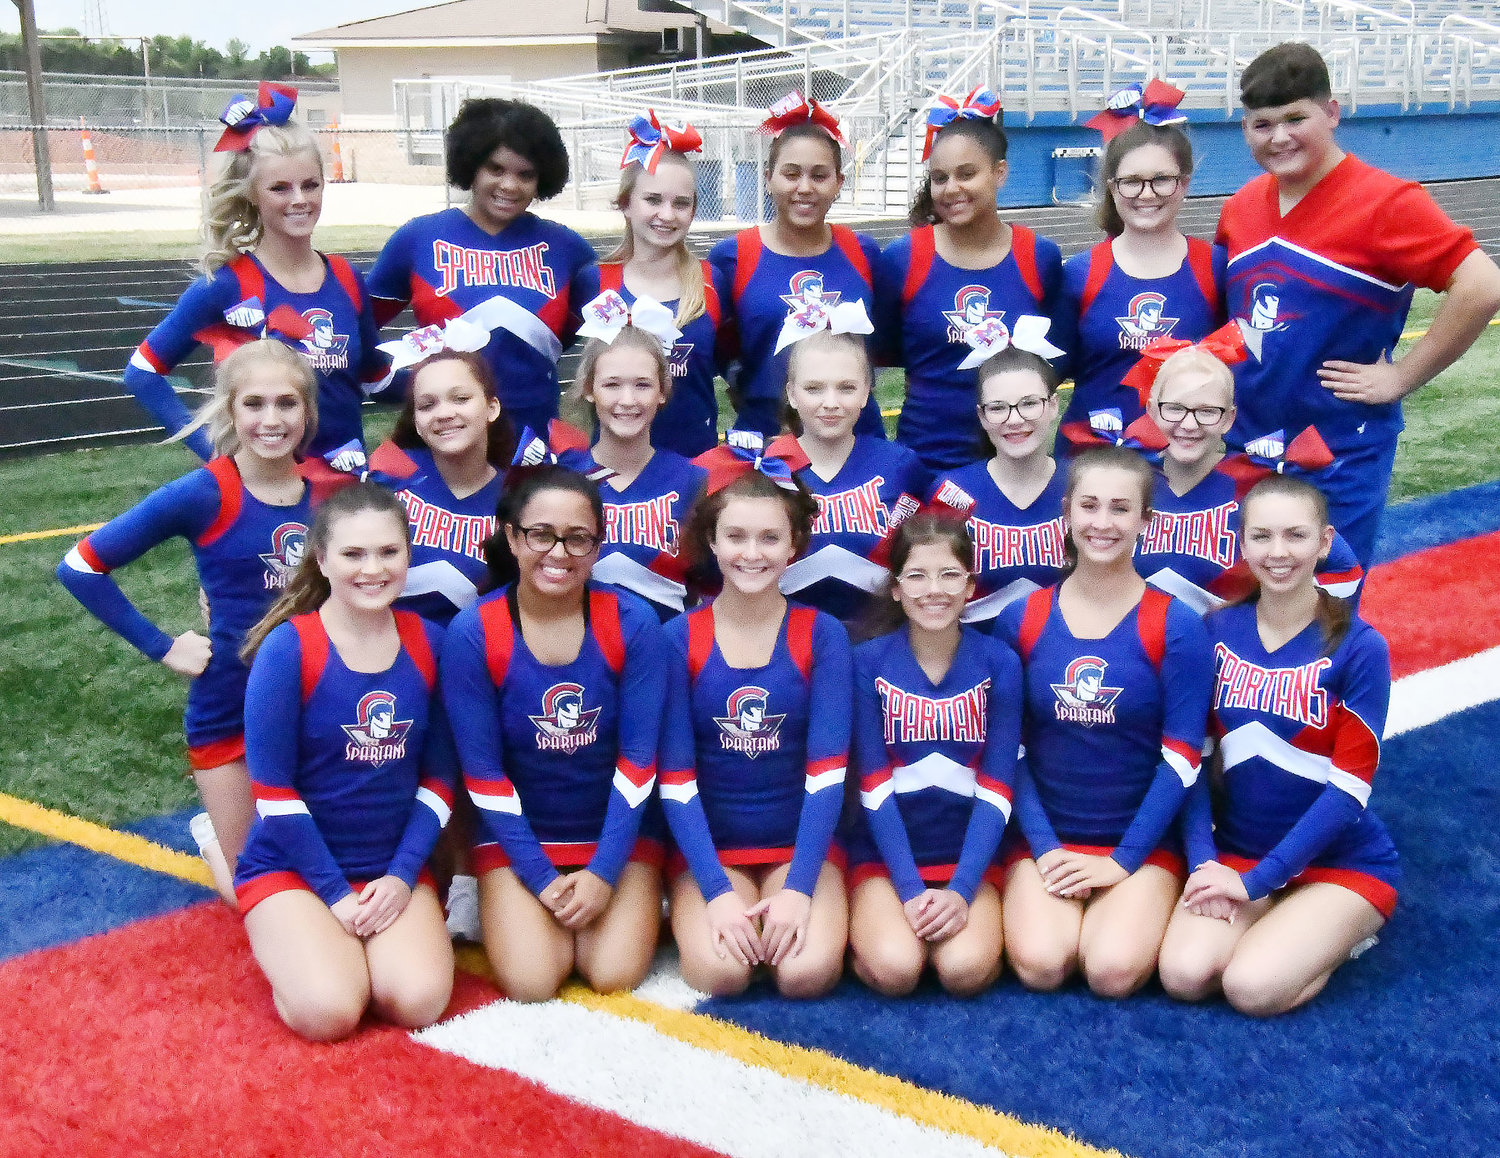 Here are the Moberly High School cheerleaders for the 2022-23 academic year.